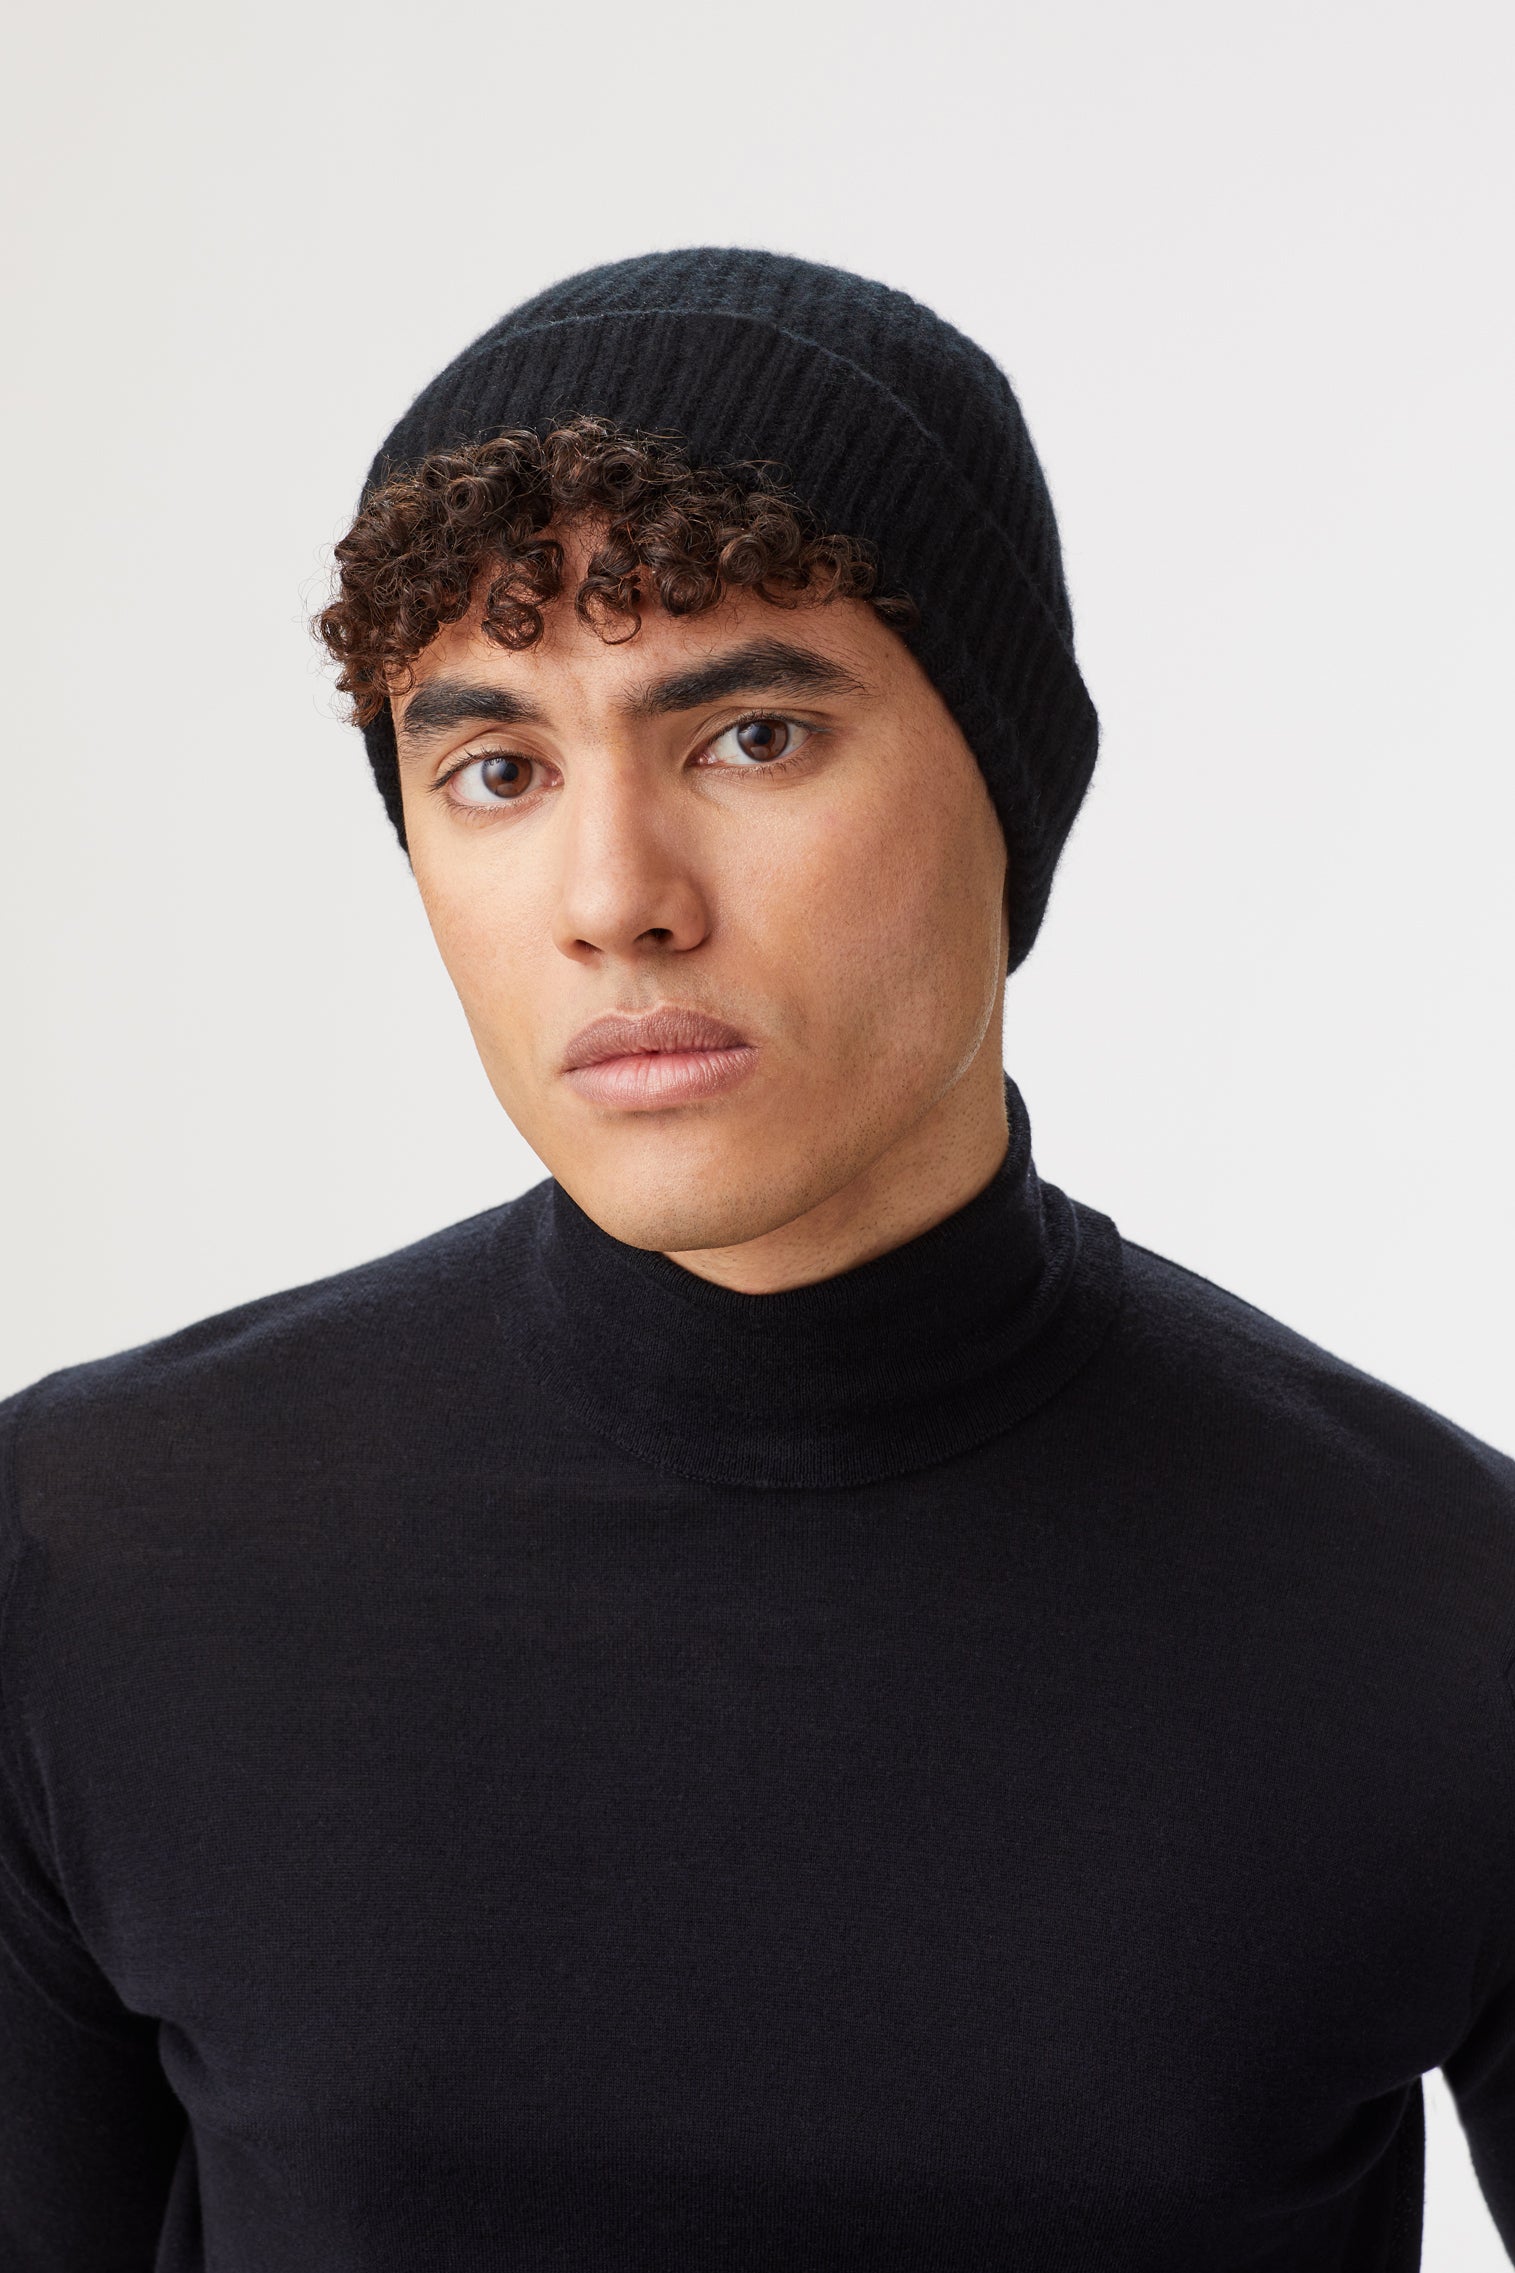 Black Cashmere Ski Beanie - Hats for Round Face Shapes - Lock & Co. Hatters London UK